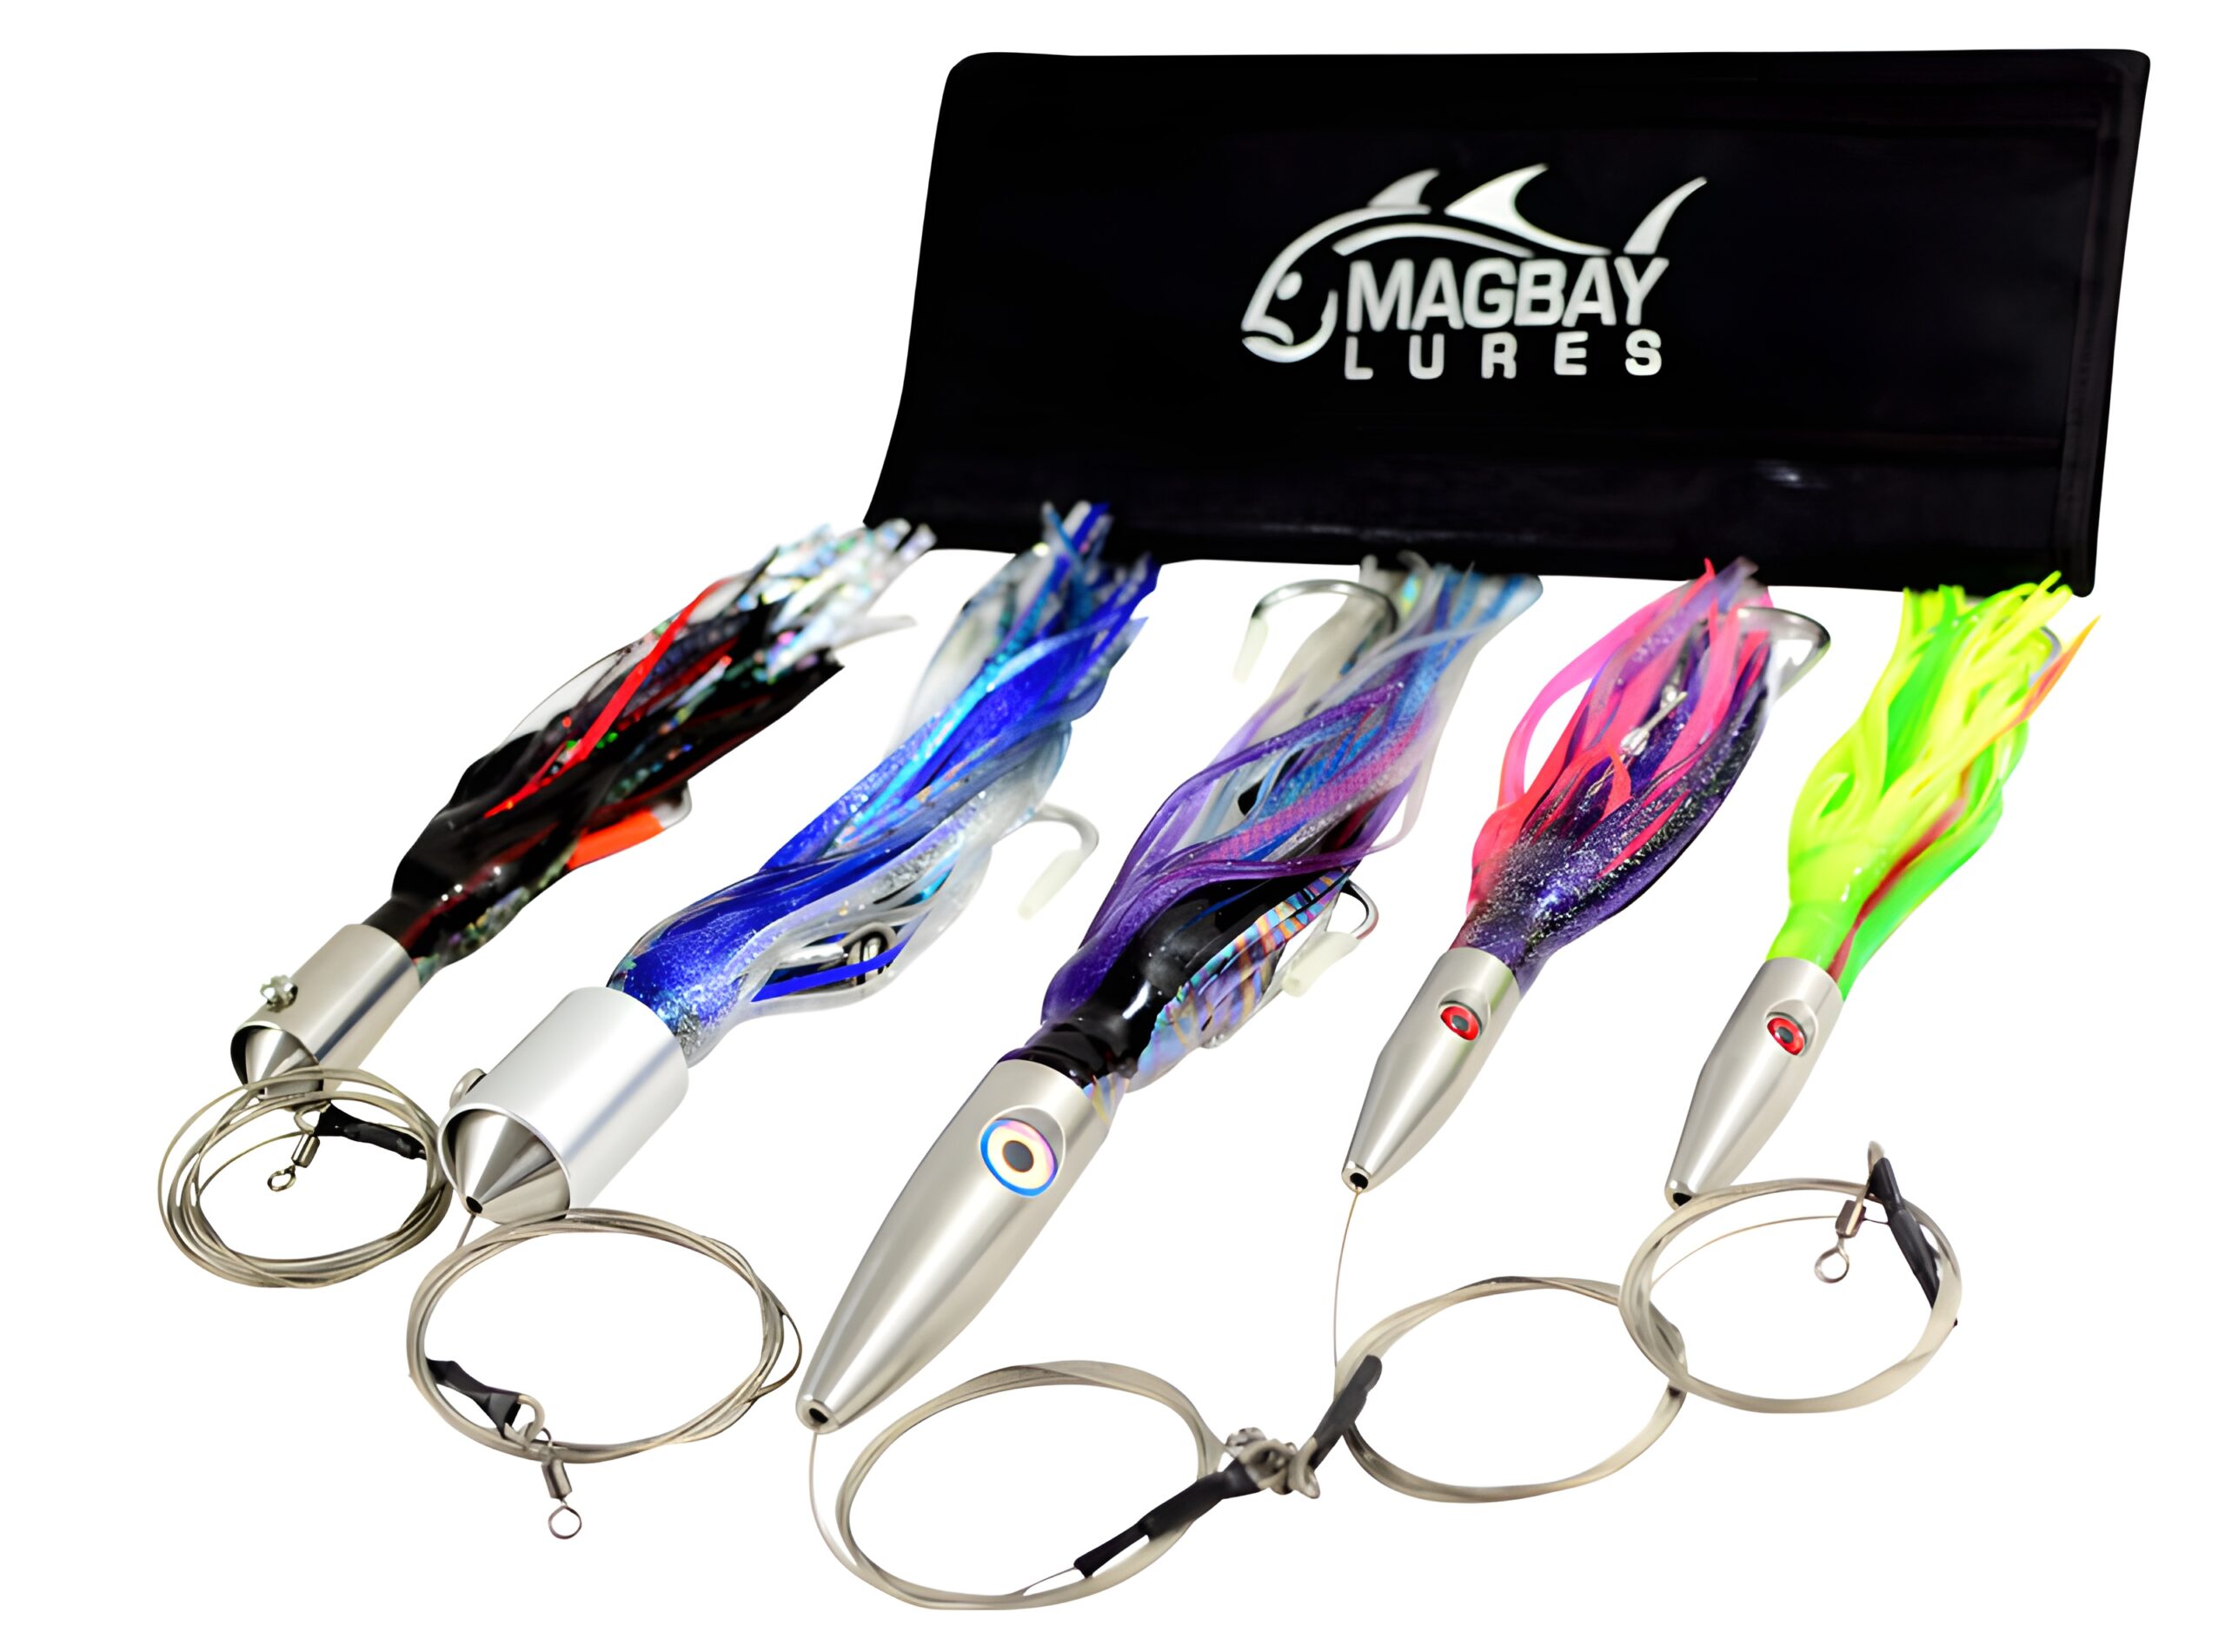 Page 2 - Buy Magbay Lures Inc Products Online at Best Prices in Ghana